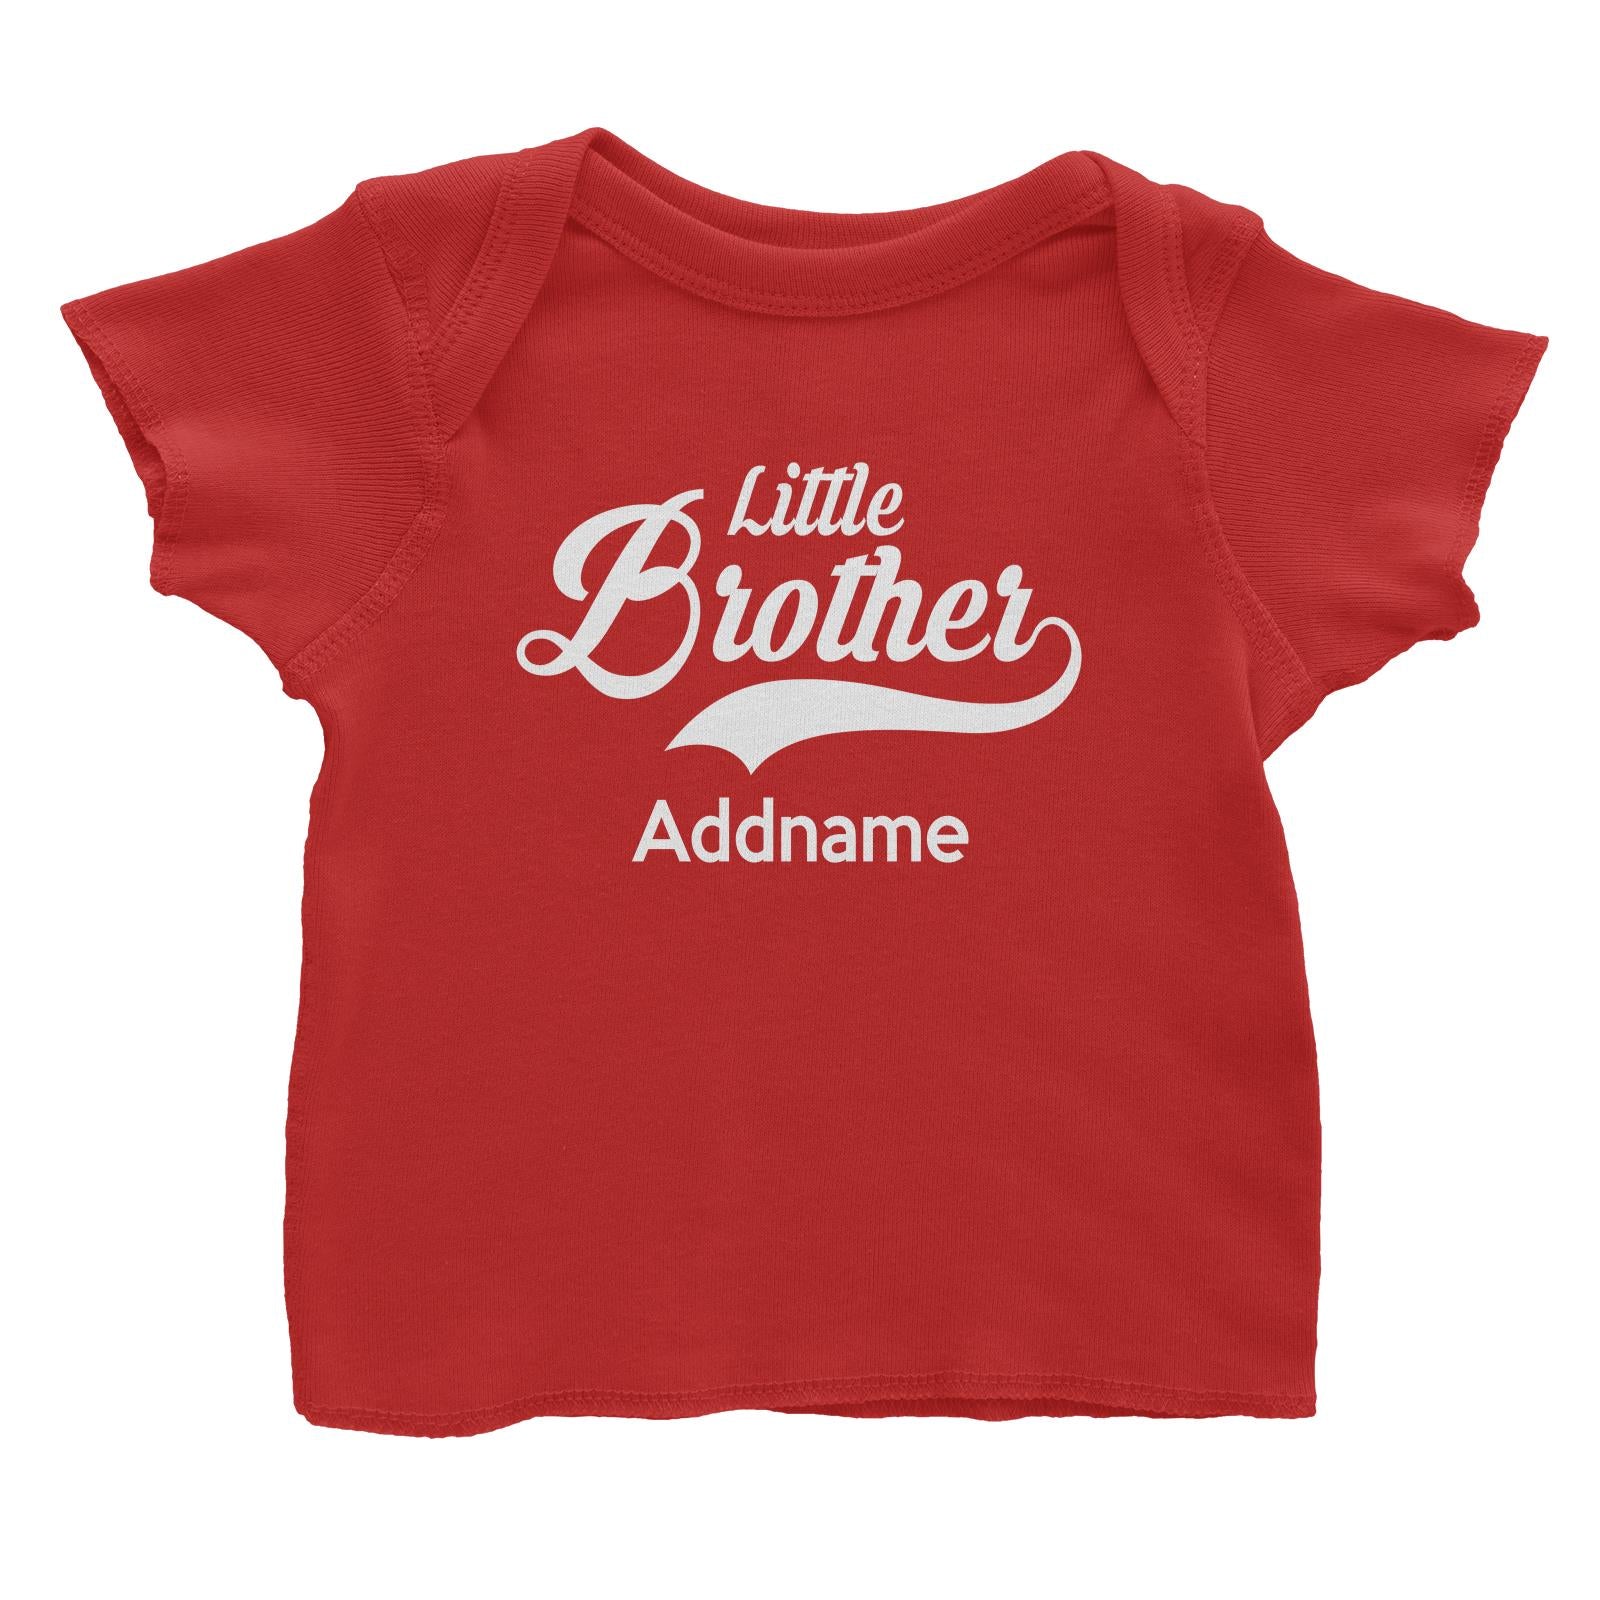 Retro Little Brother Addname Baby T-Shirt